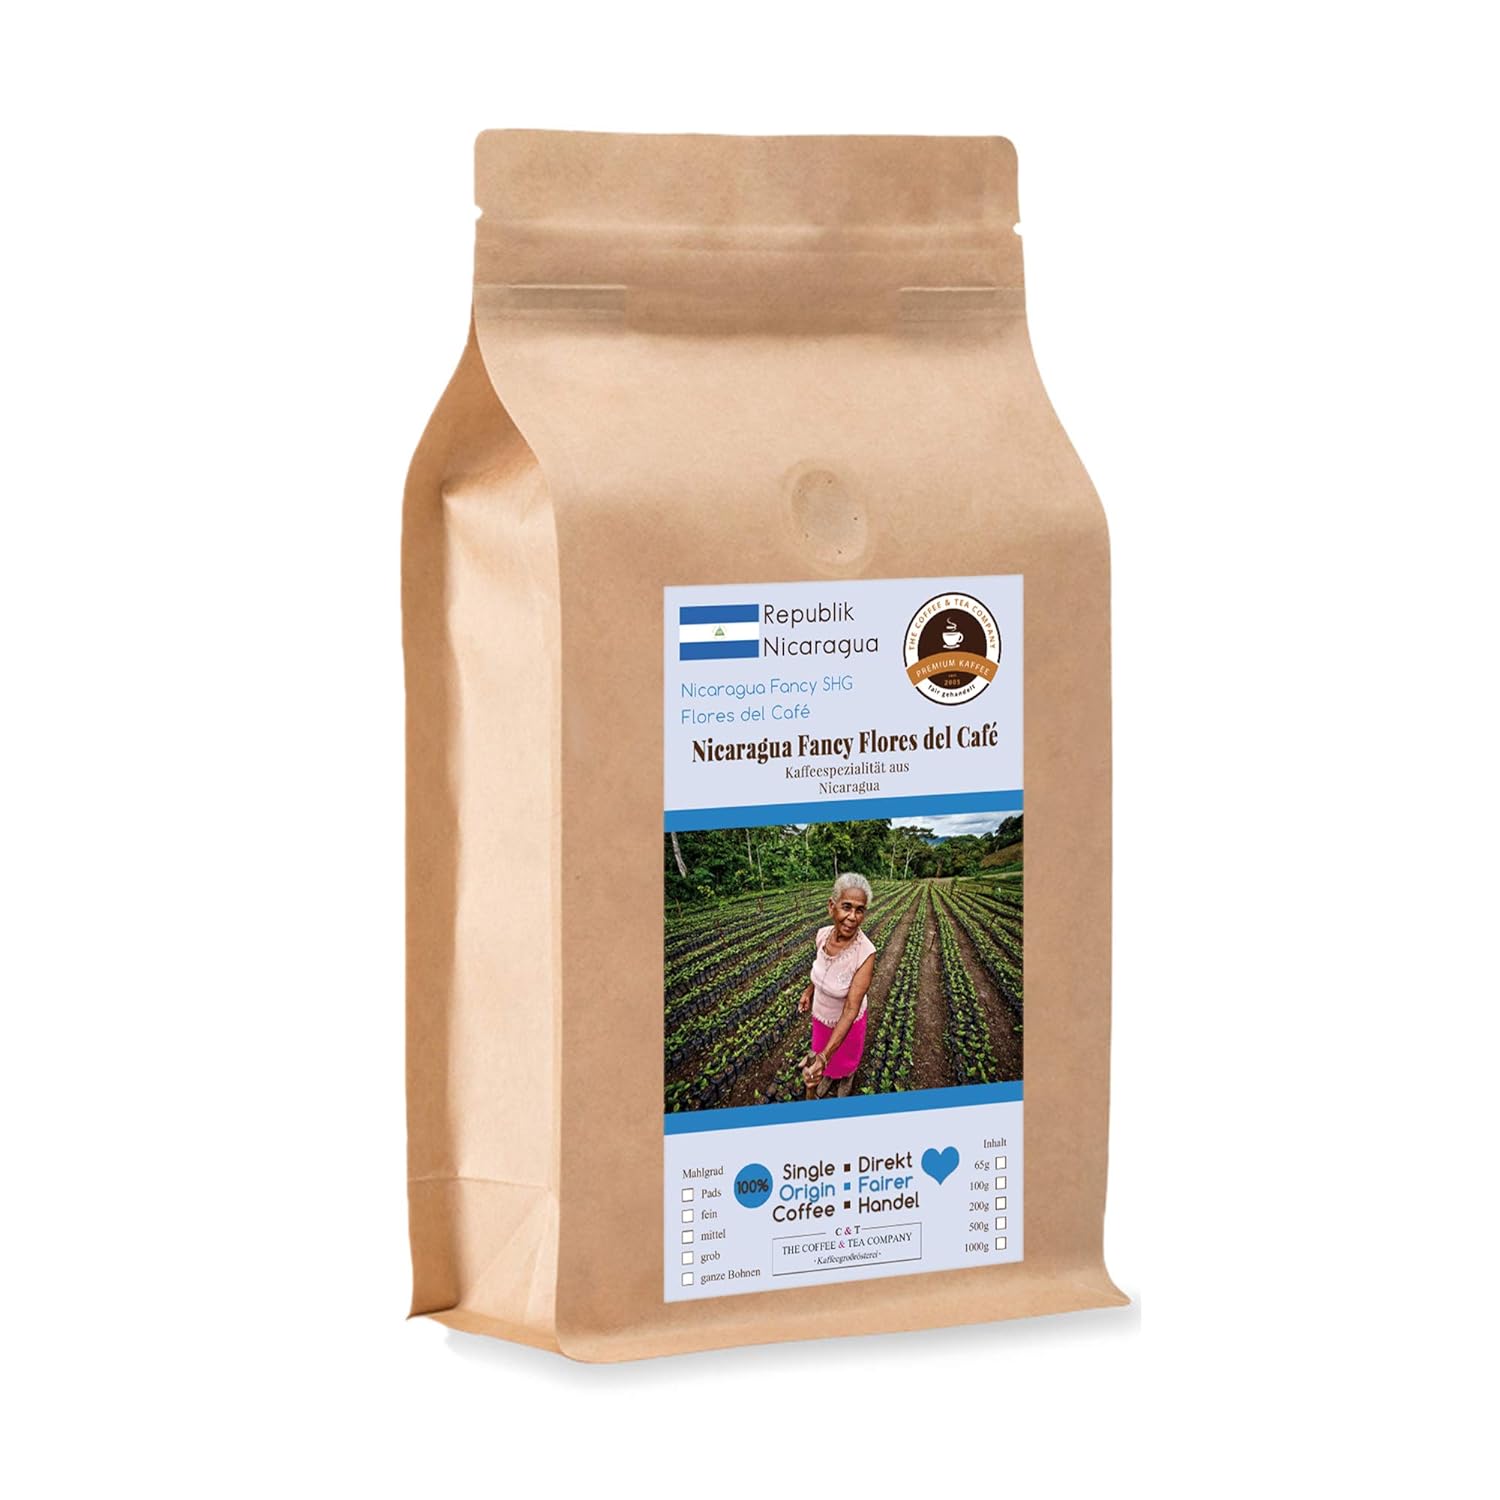 Coffee Globetrotter - Coffee with Heart - Nicaragua Fancy Flores del Café - 500 g Whole Bean - Top Coffee from the Women\'s Fund Project Fair Traded Supports Social Projects